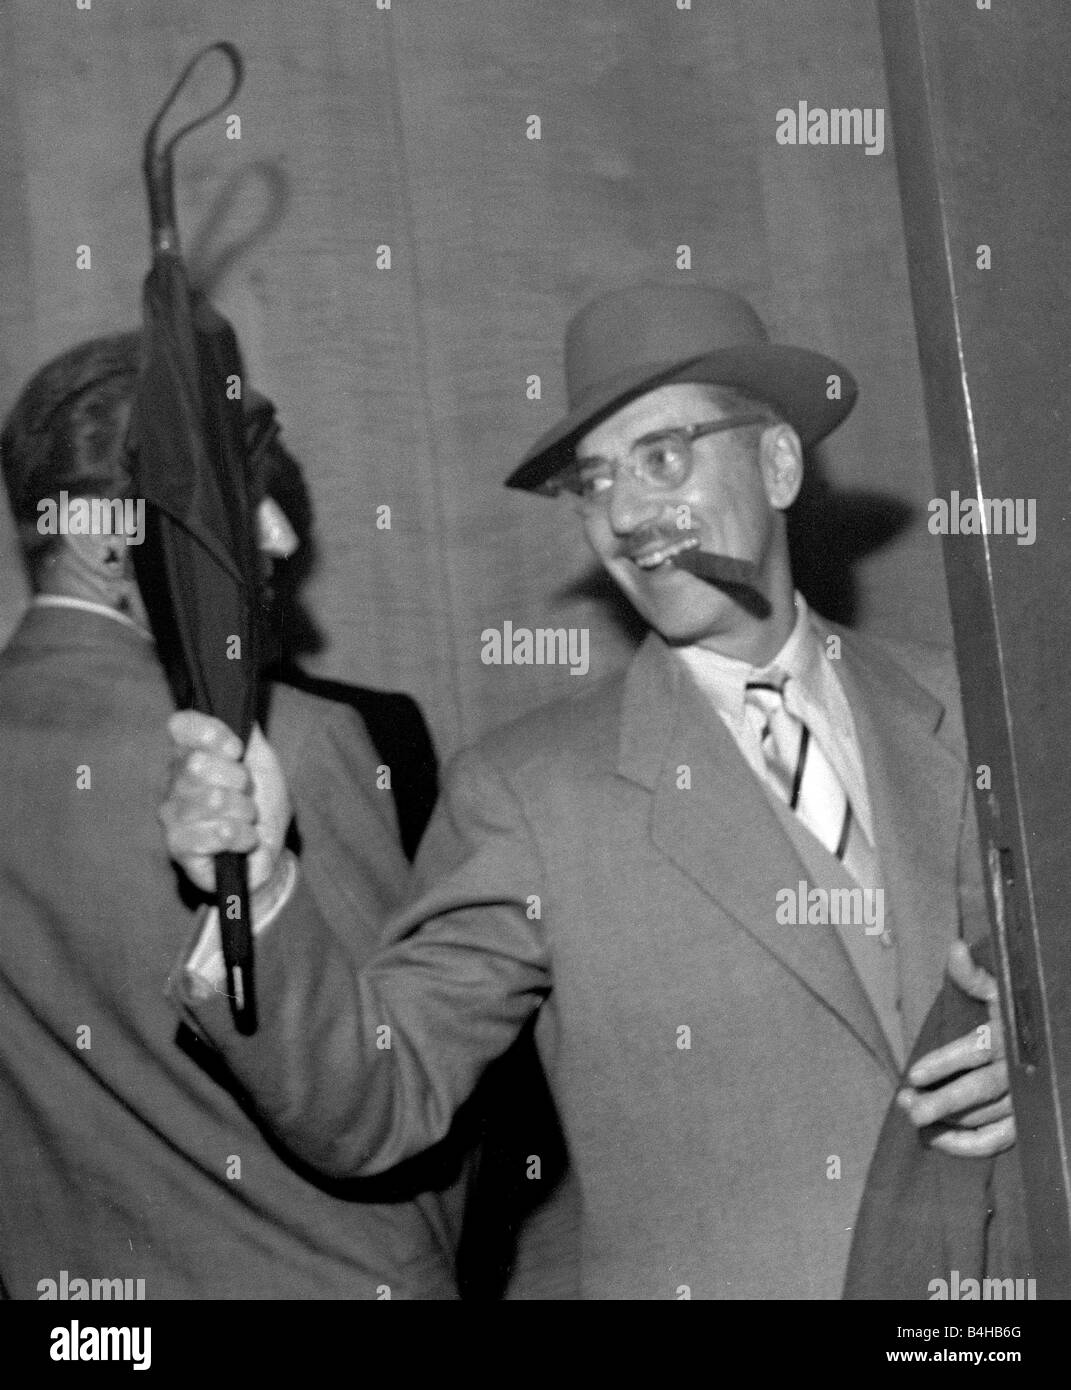 Comedian actor Groucho Marx one of the famous Marx Brothers enters the Savoy hotel in London smoking a Cigar and waving an umbrella June 1954 Stock Photo